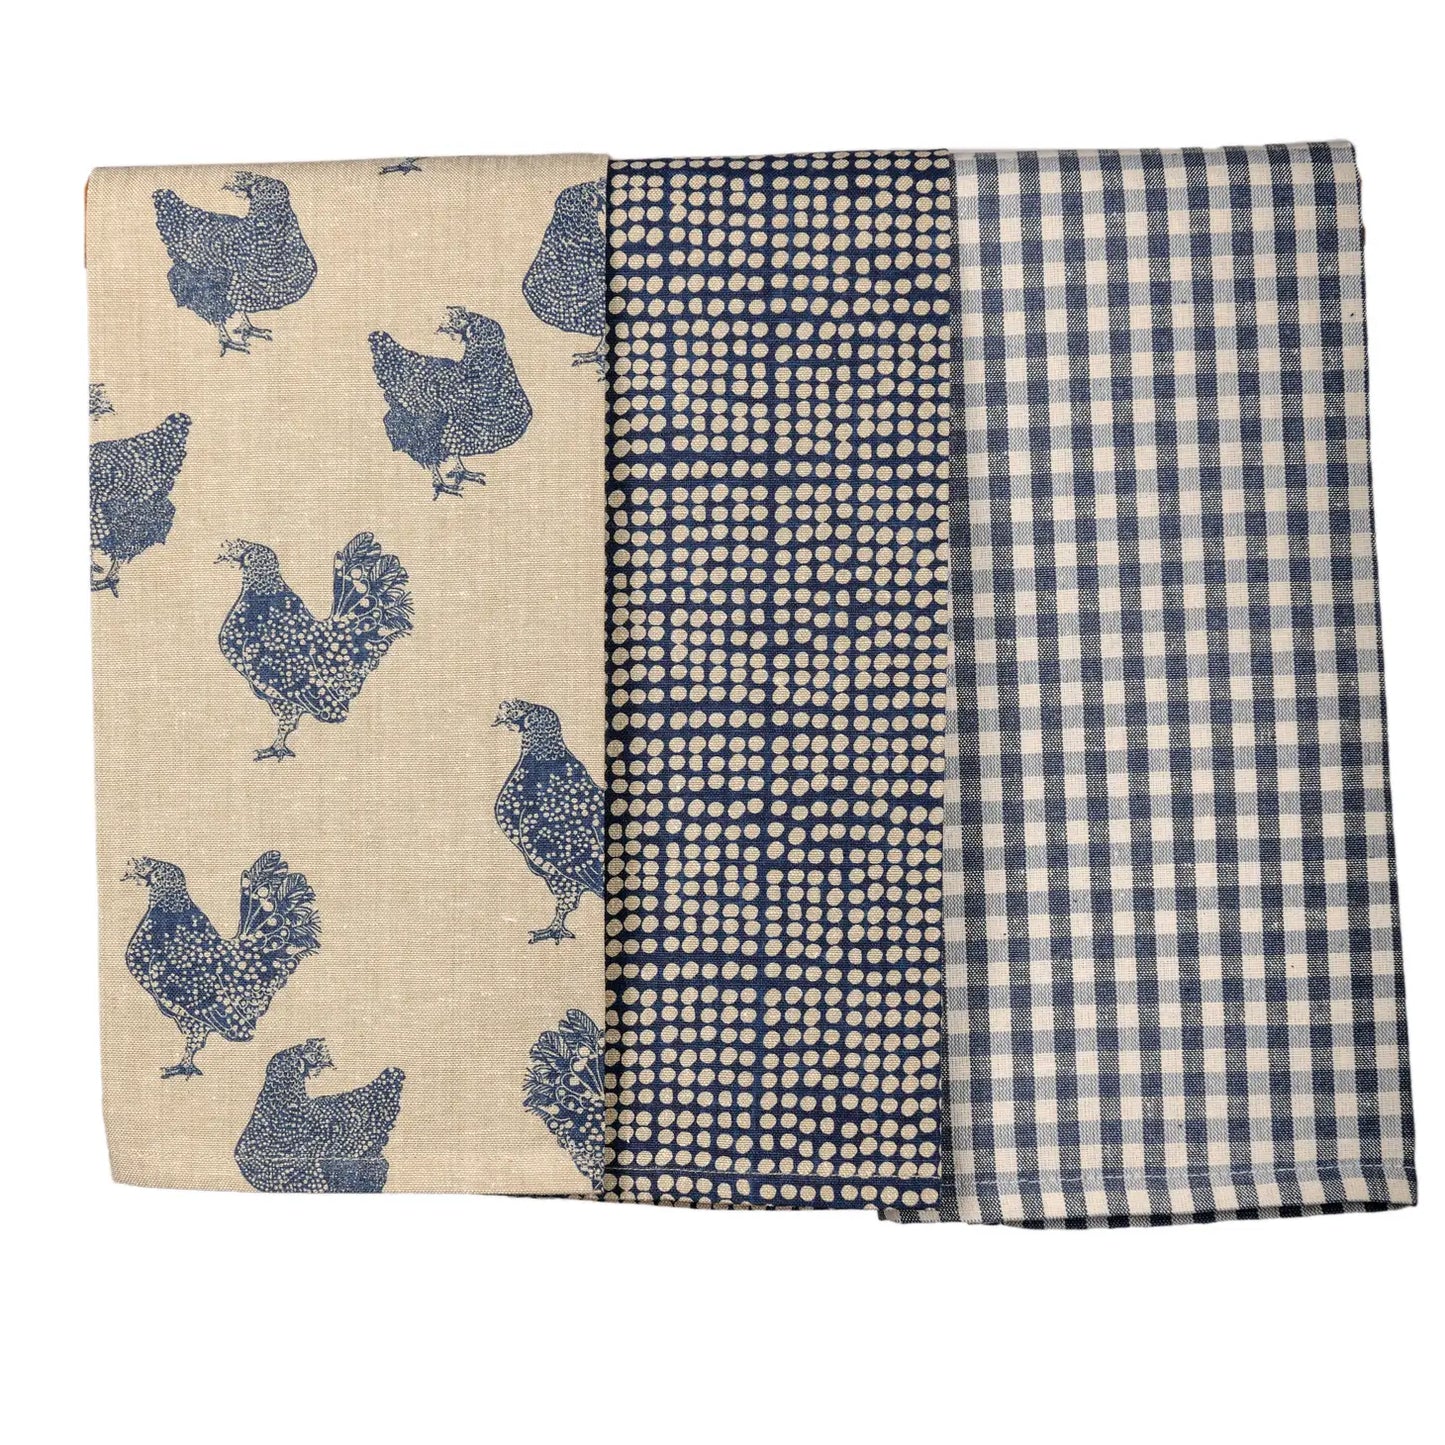 Chicken print set of 3 towels recycled cotton.  Raine & Humble recycled cotton. Blue chicken, gingham and stripped towels